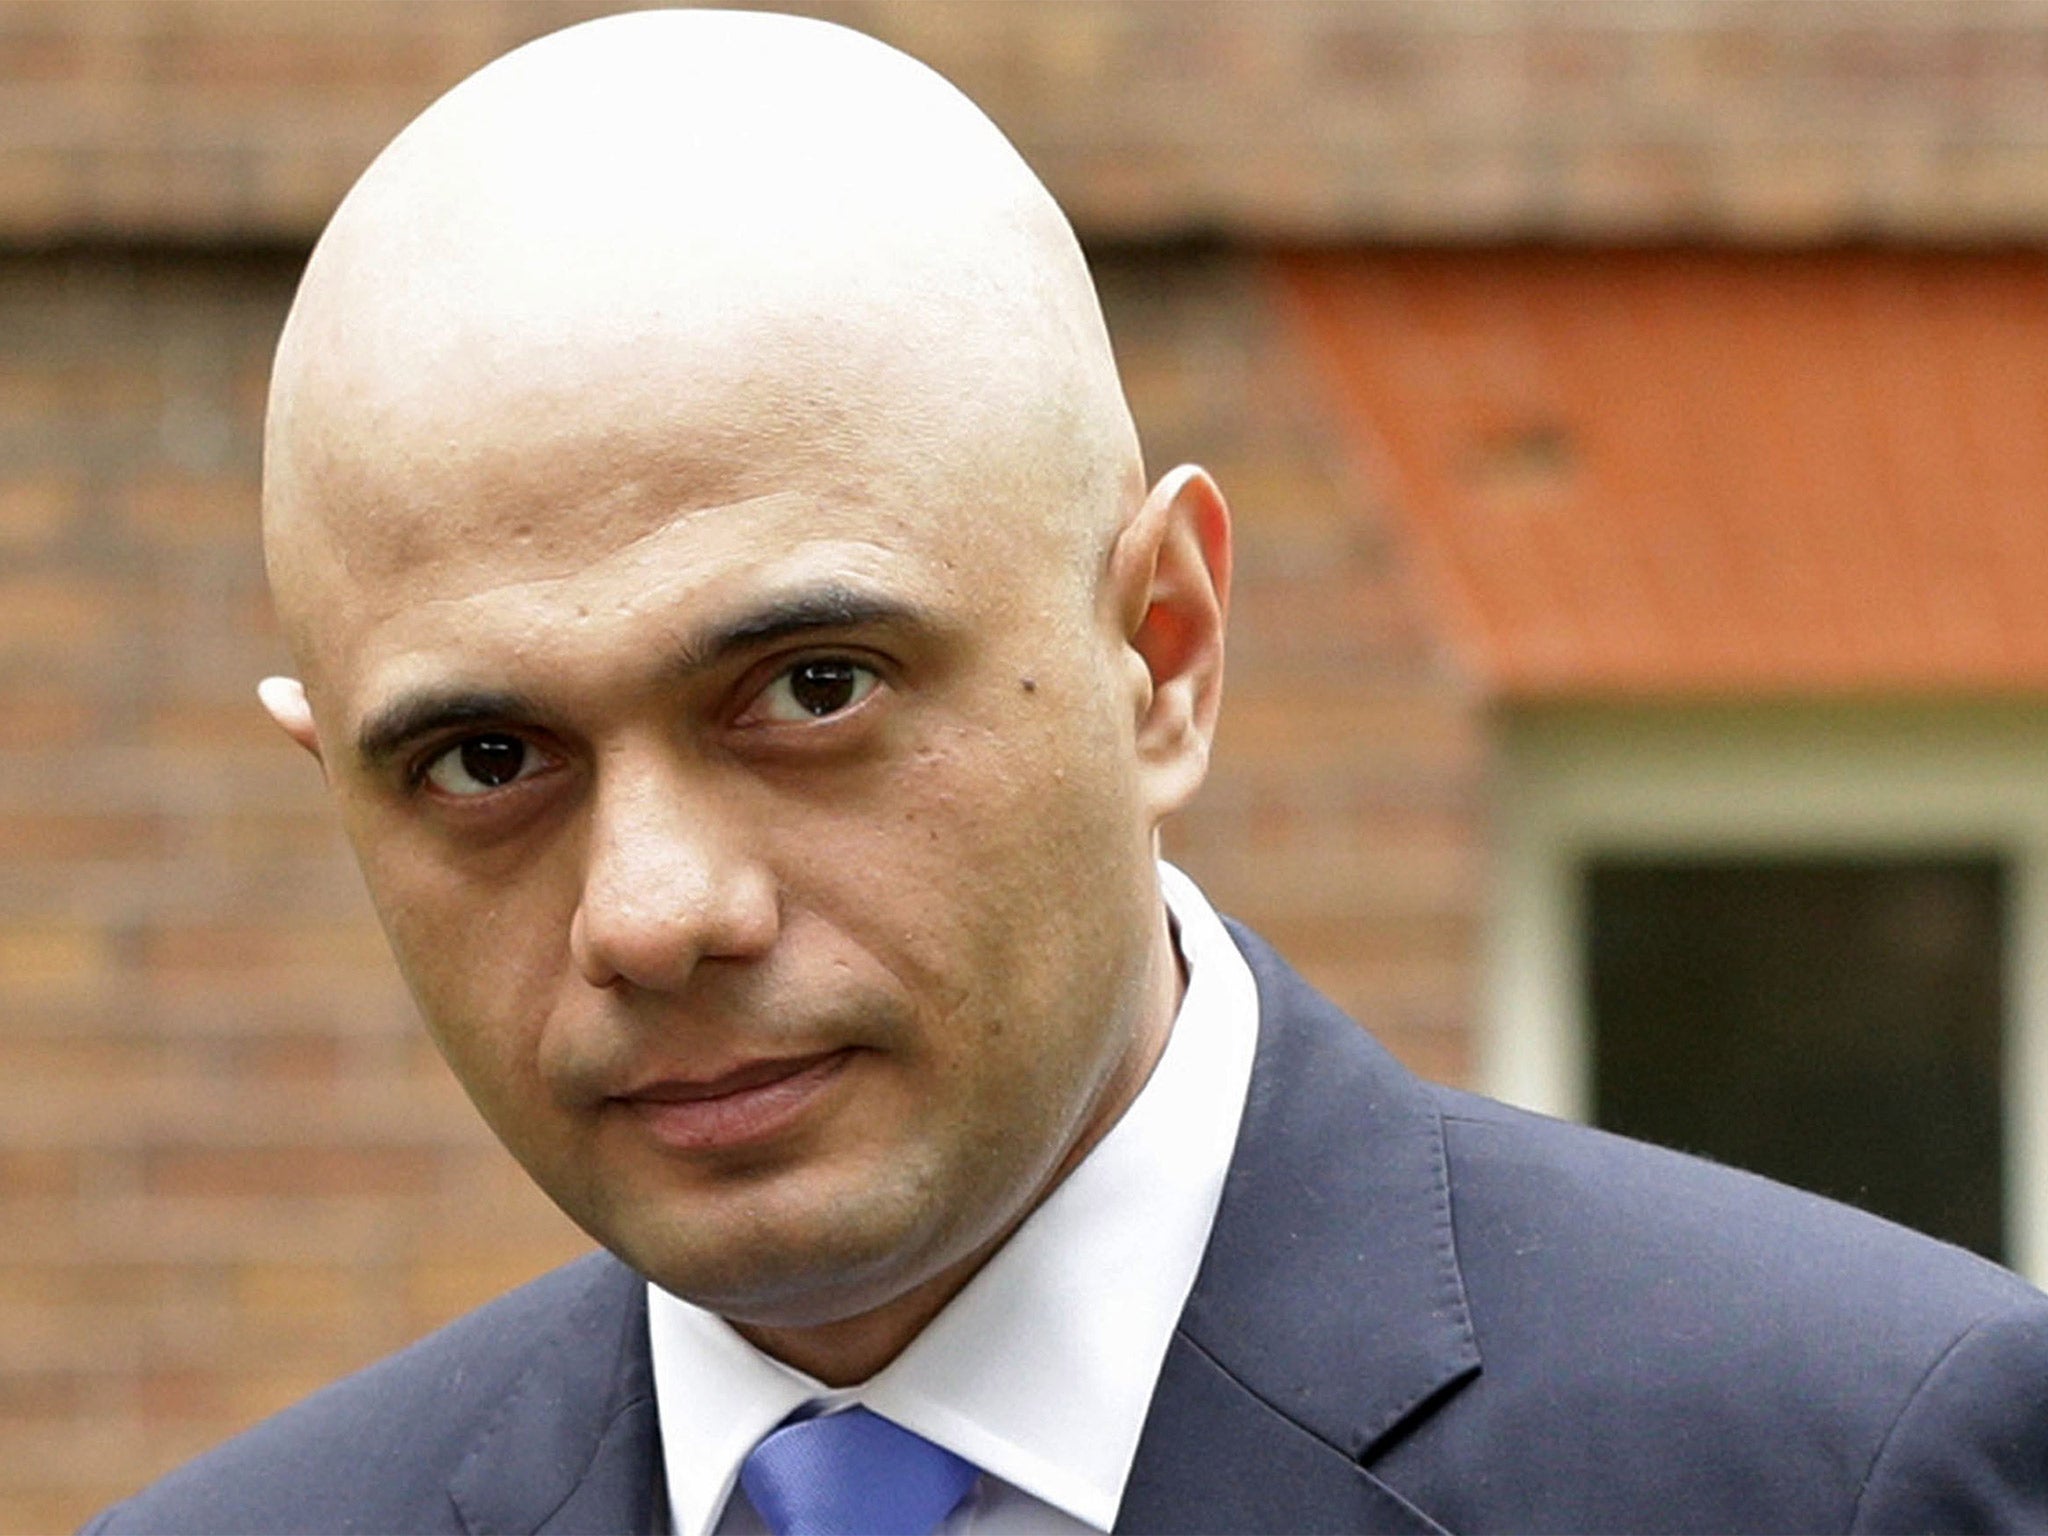 Sajid Javid is the first Asian male Conservative cabinet minister